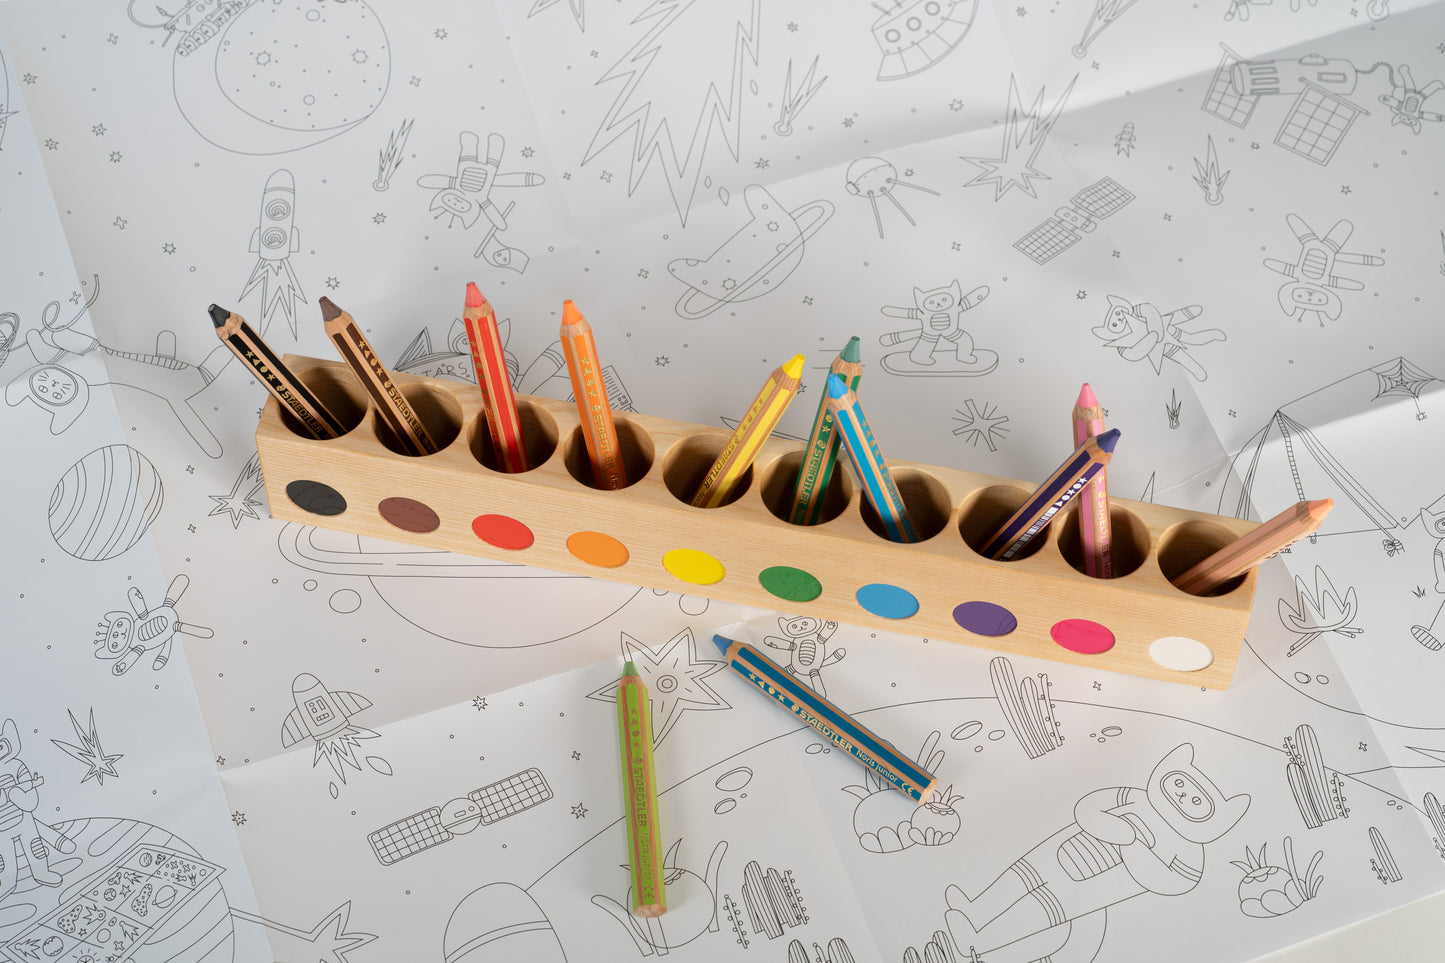 Large montessori pencil holder, with staedtler noris pencils for small kids, on top of giant coloring poster